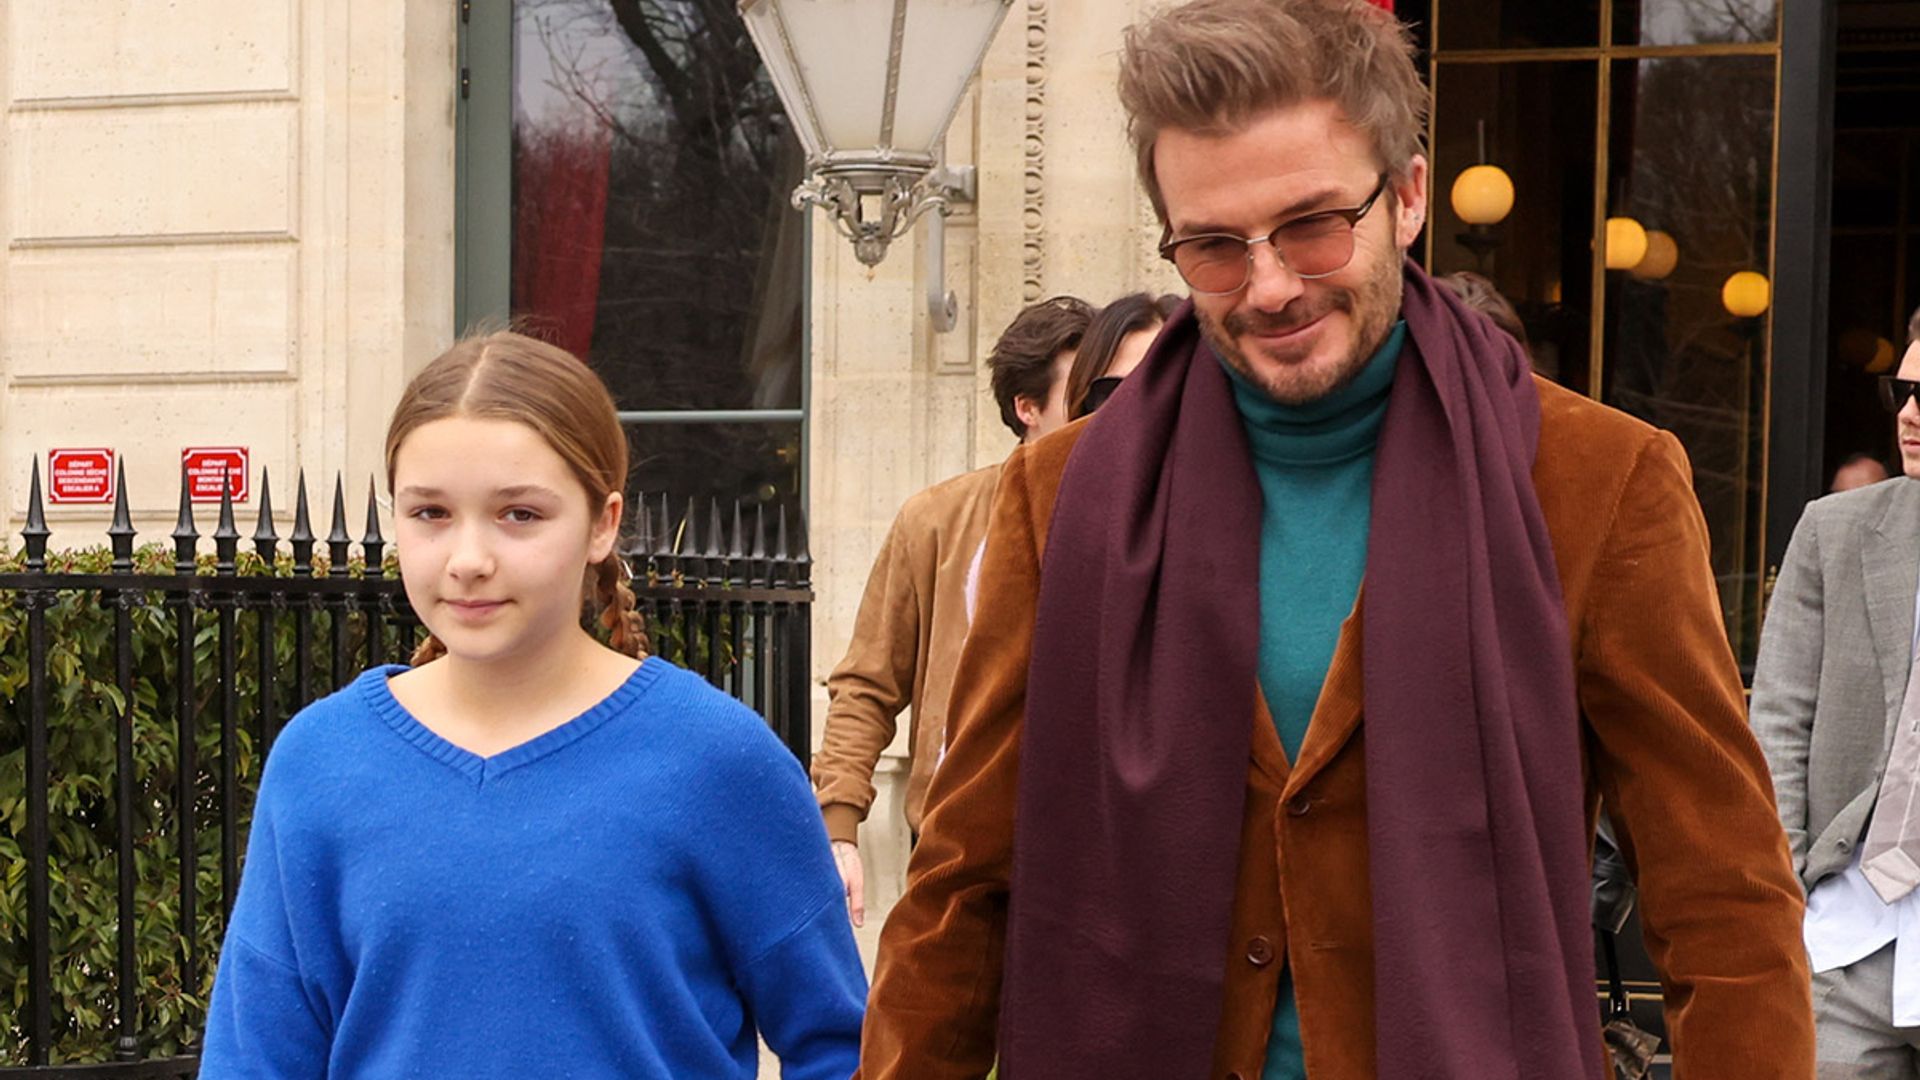 David Beckham and daughter Harper show their special bond in rare photo